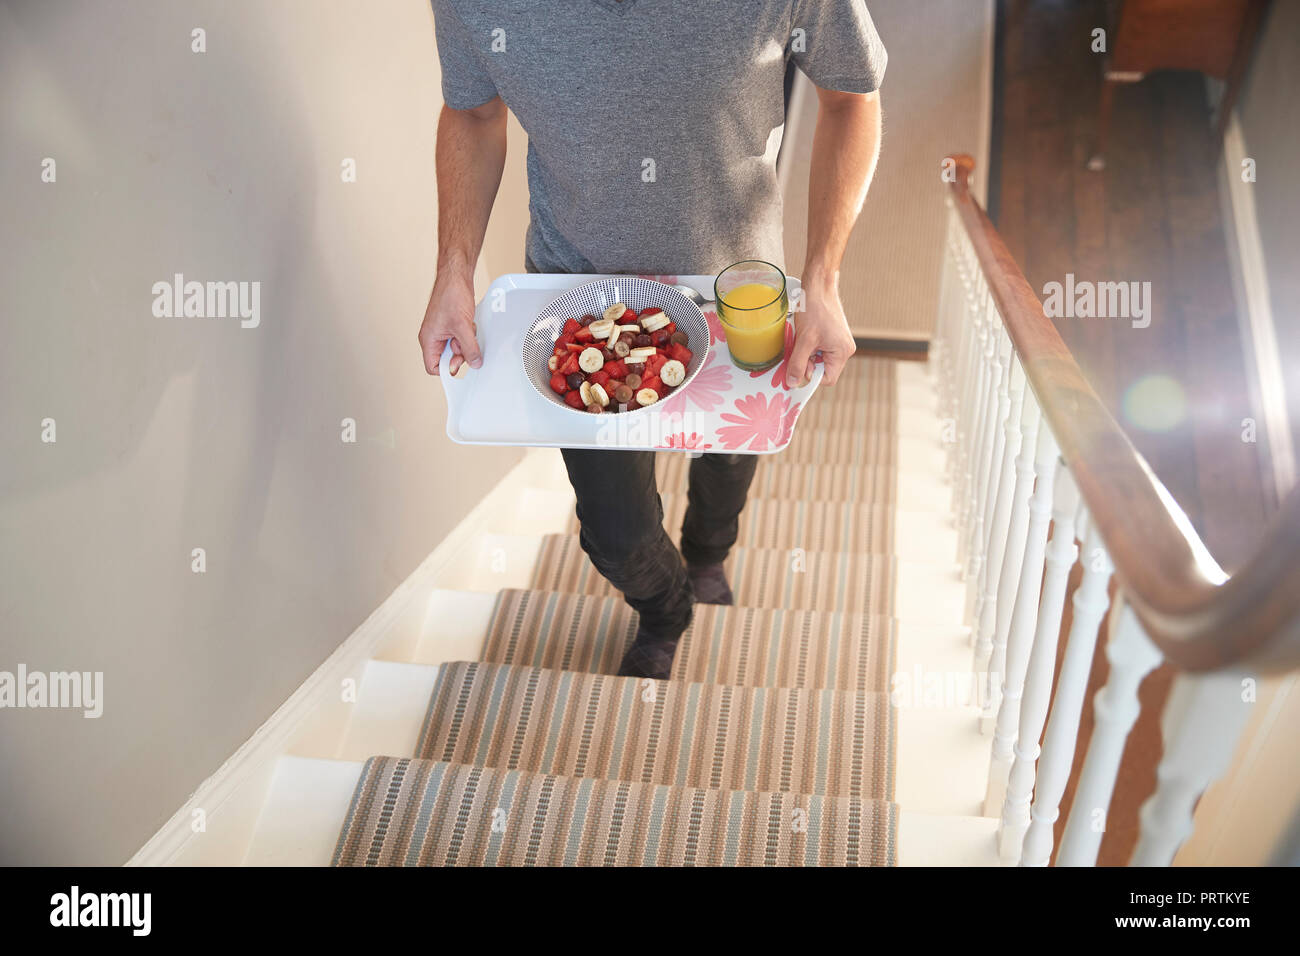 Young man carrying breakfast tray upstairs, neck down Stock Photo